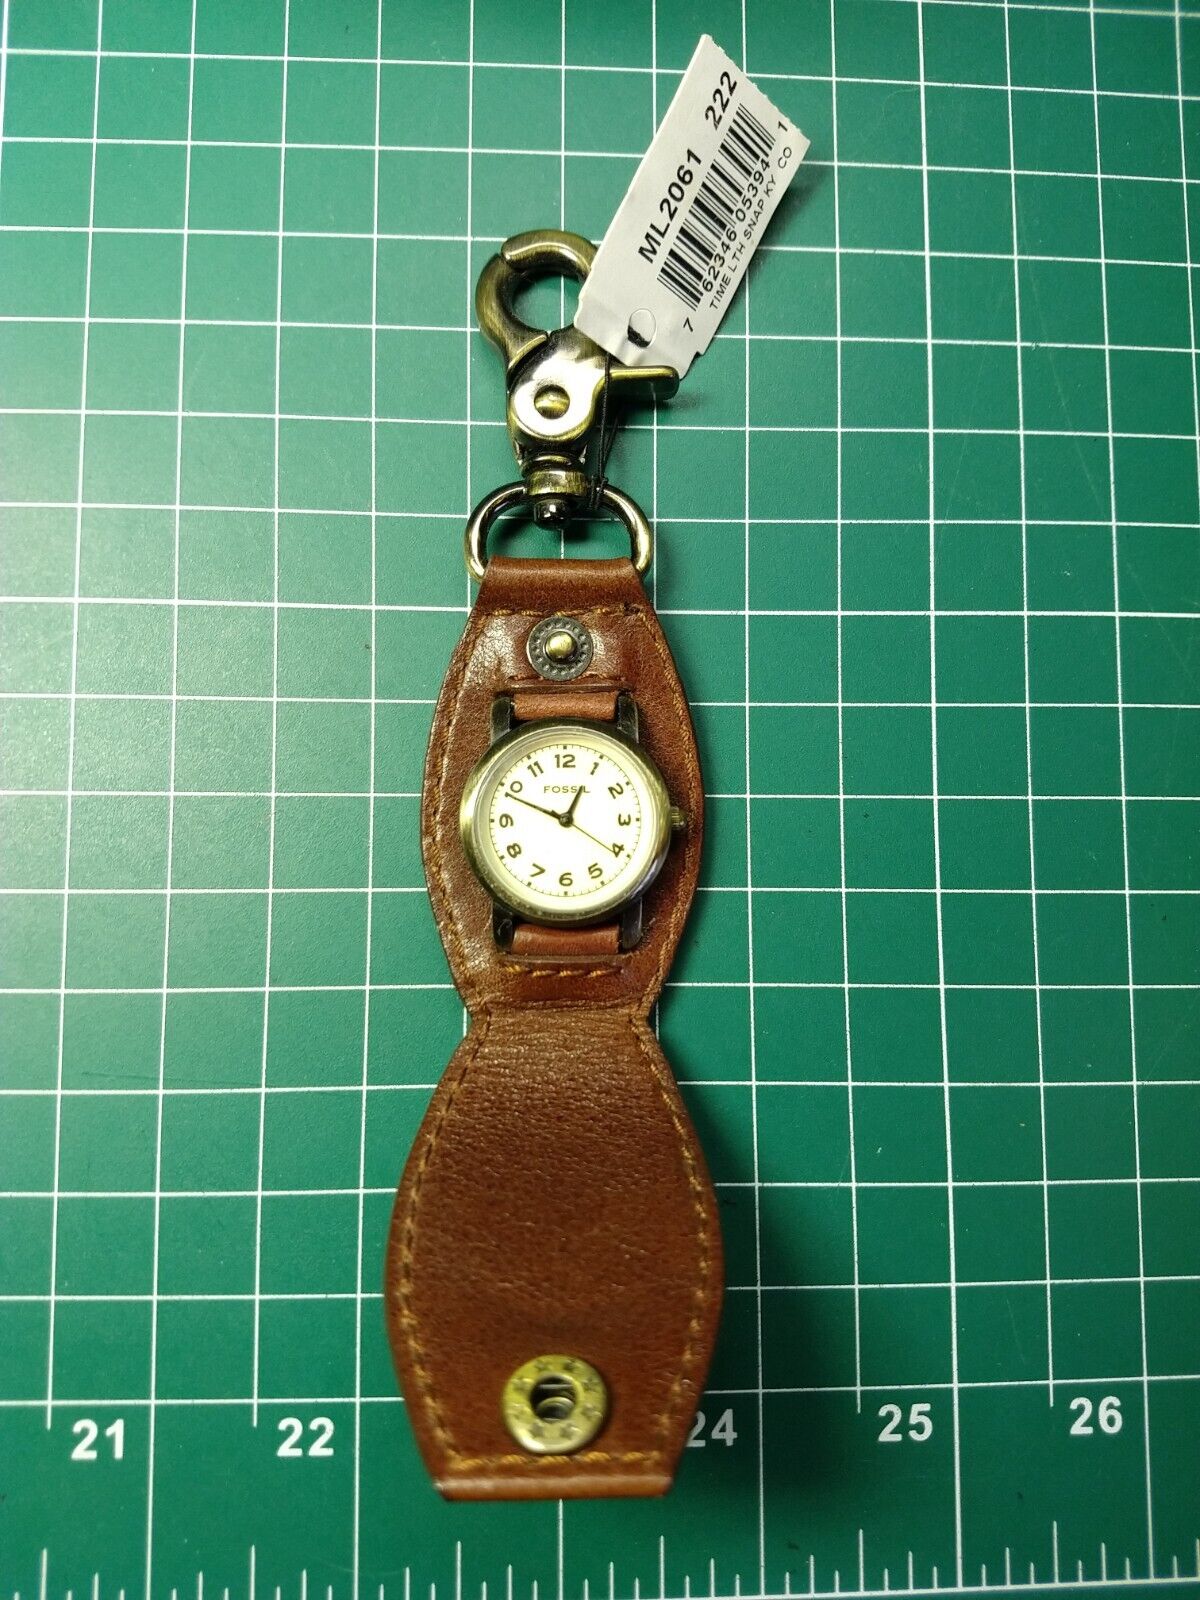 Fossil Tech Key Fob Watch with a new battery and running 